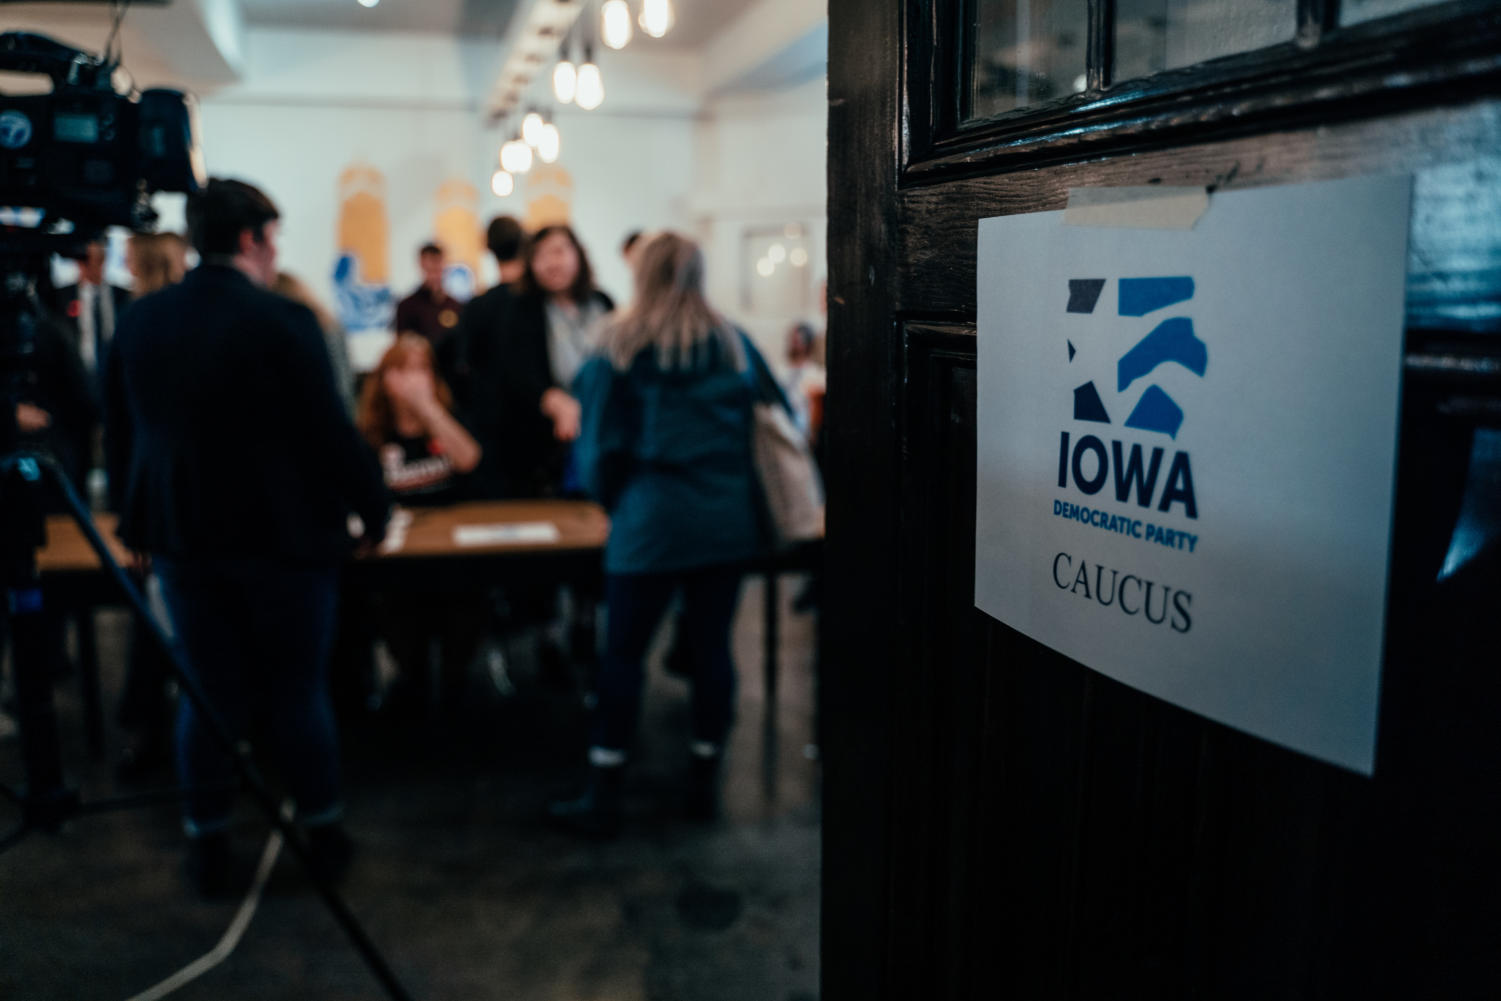 The Iowa satellite caucus in Hyde Park brought 24 Iowans to University Church on February 3.